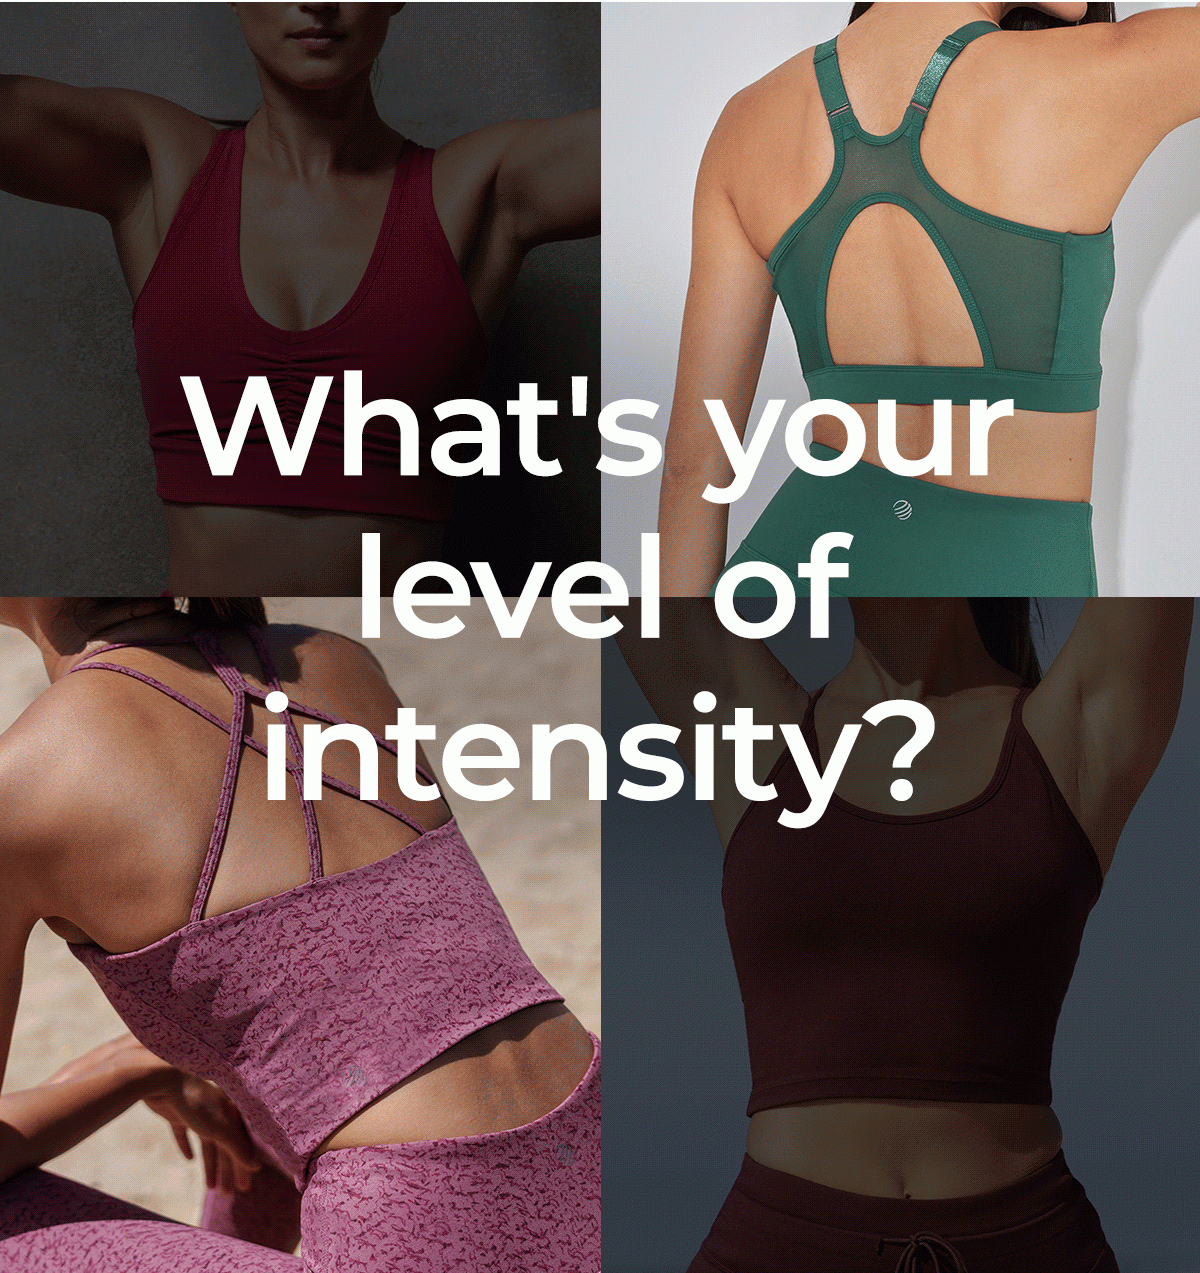 What's your level of intensity?